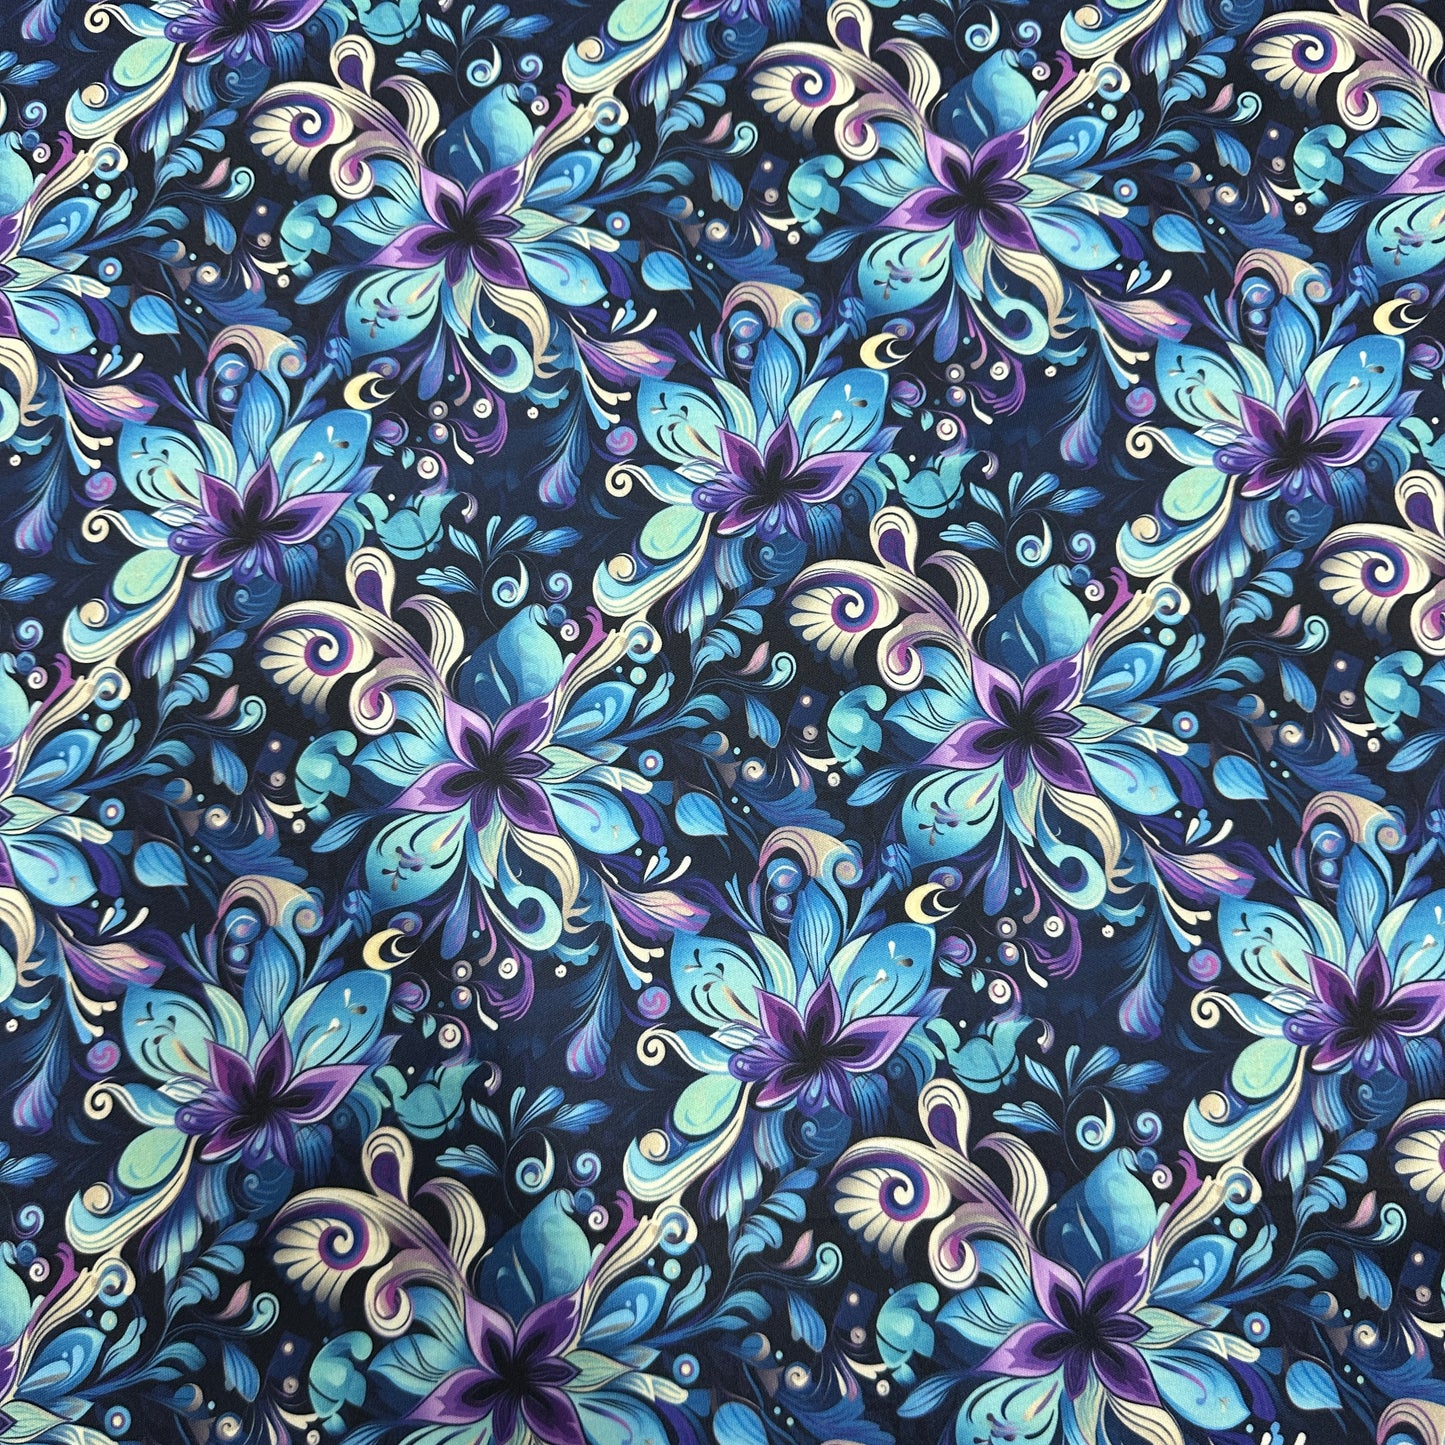 Aqua and Purple Floral on Navy 1 mil PUL Fabric - Made in the USA